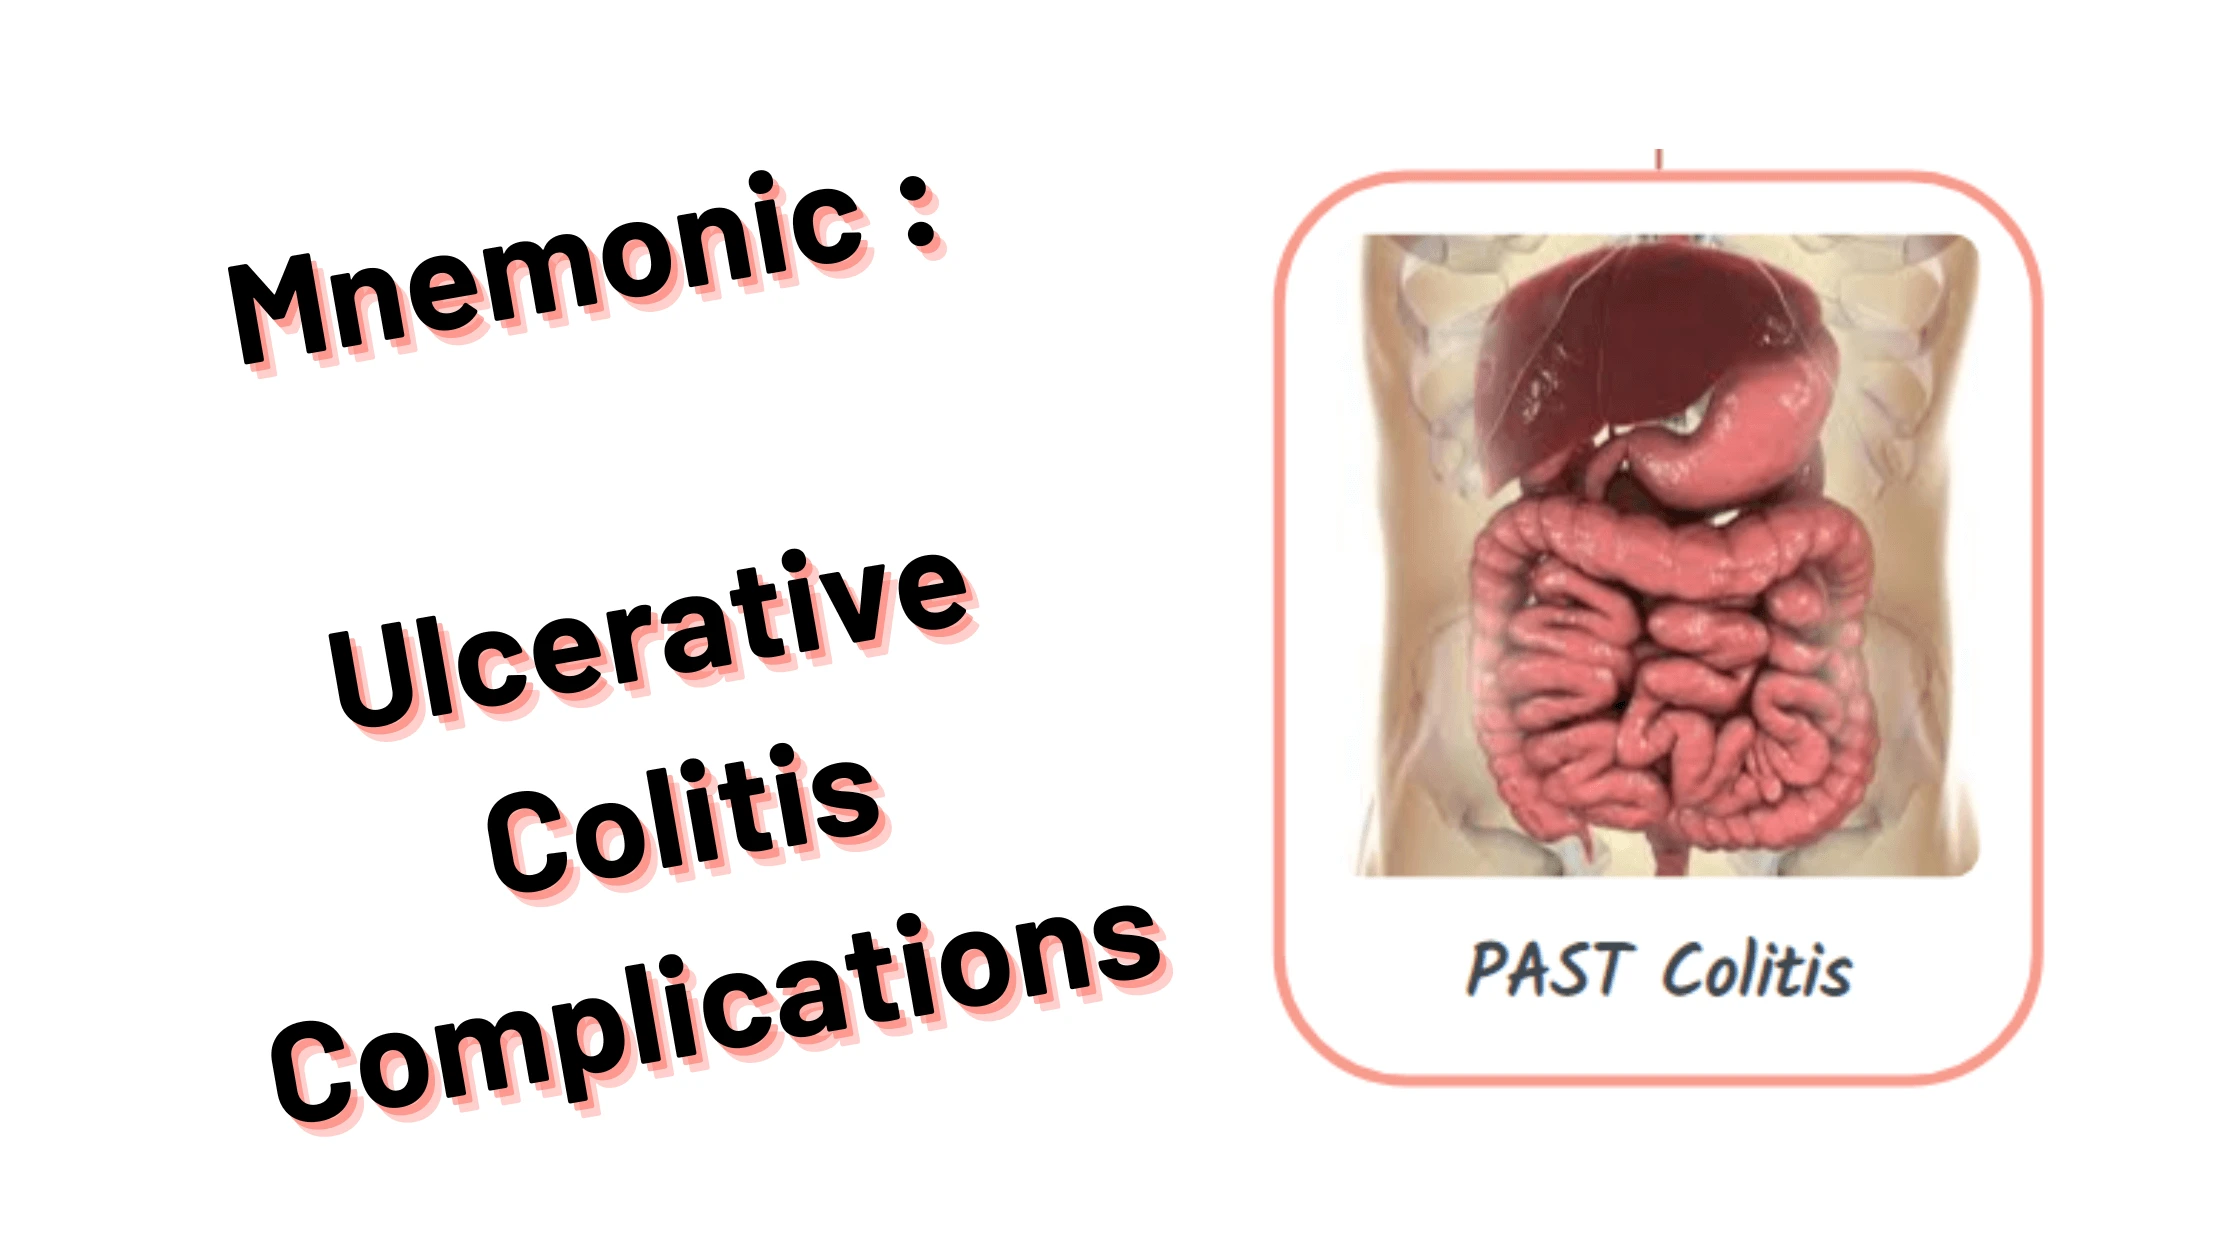 You are currently viewing [Very Cool] Mnemonic : Ulcerative Colitis Complications